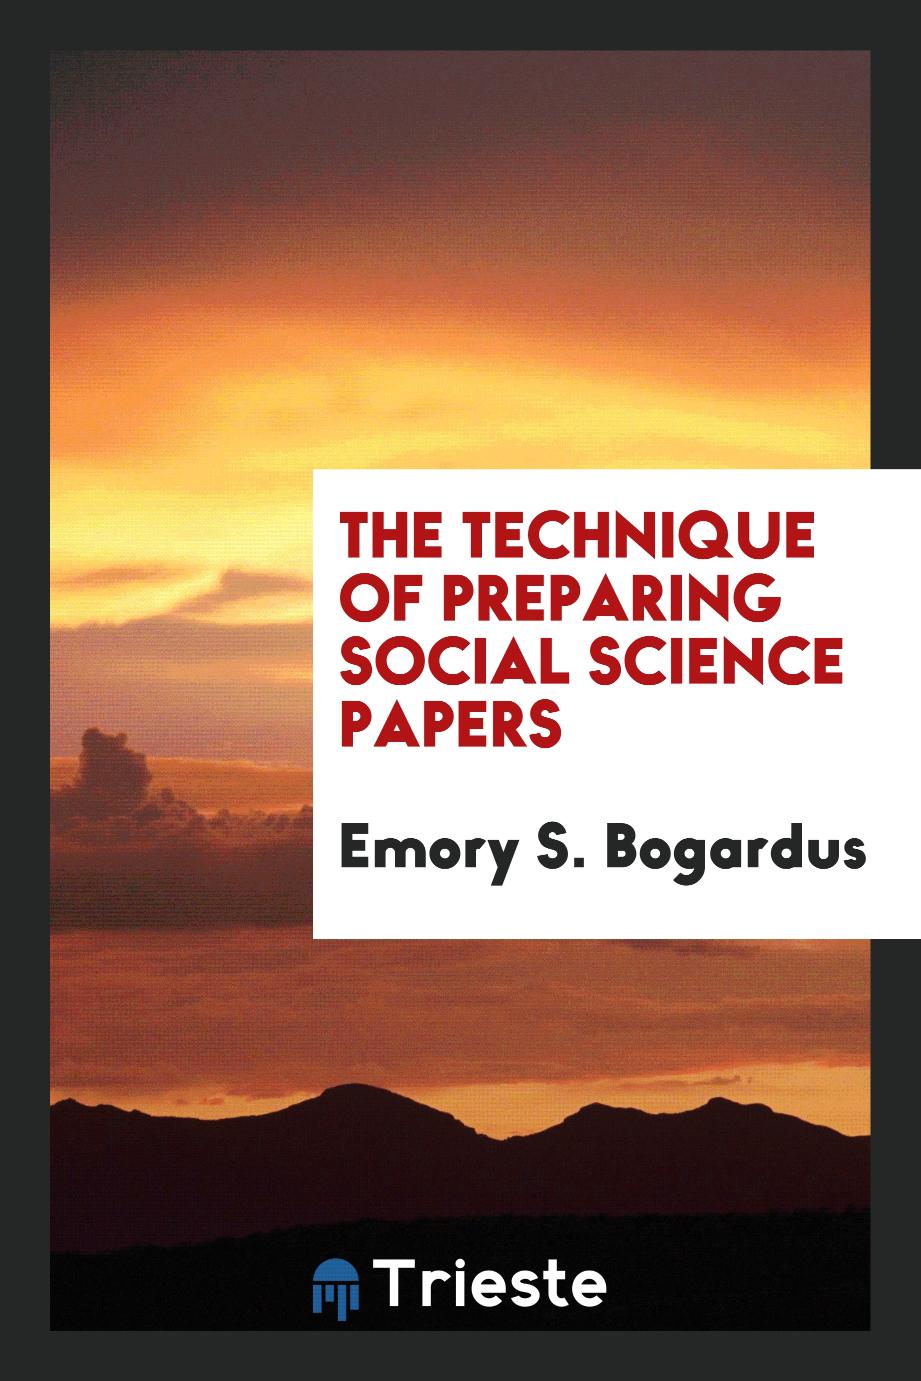 The technique of preparing social science papers